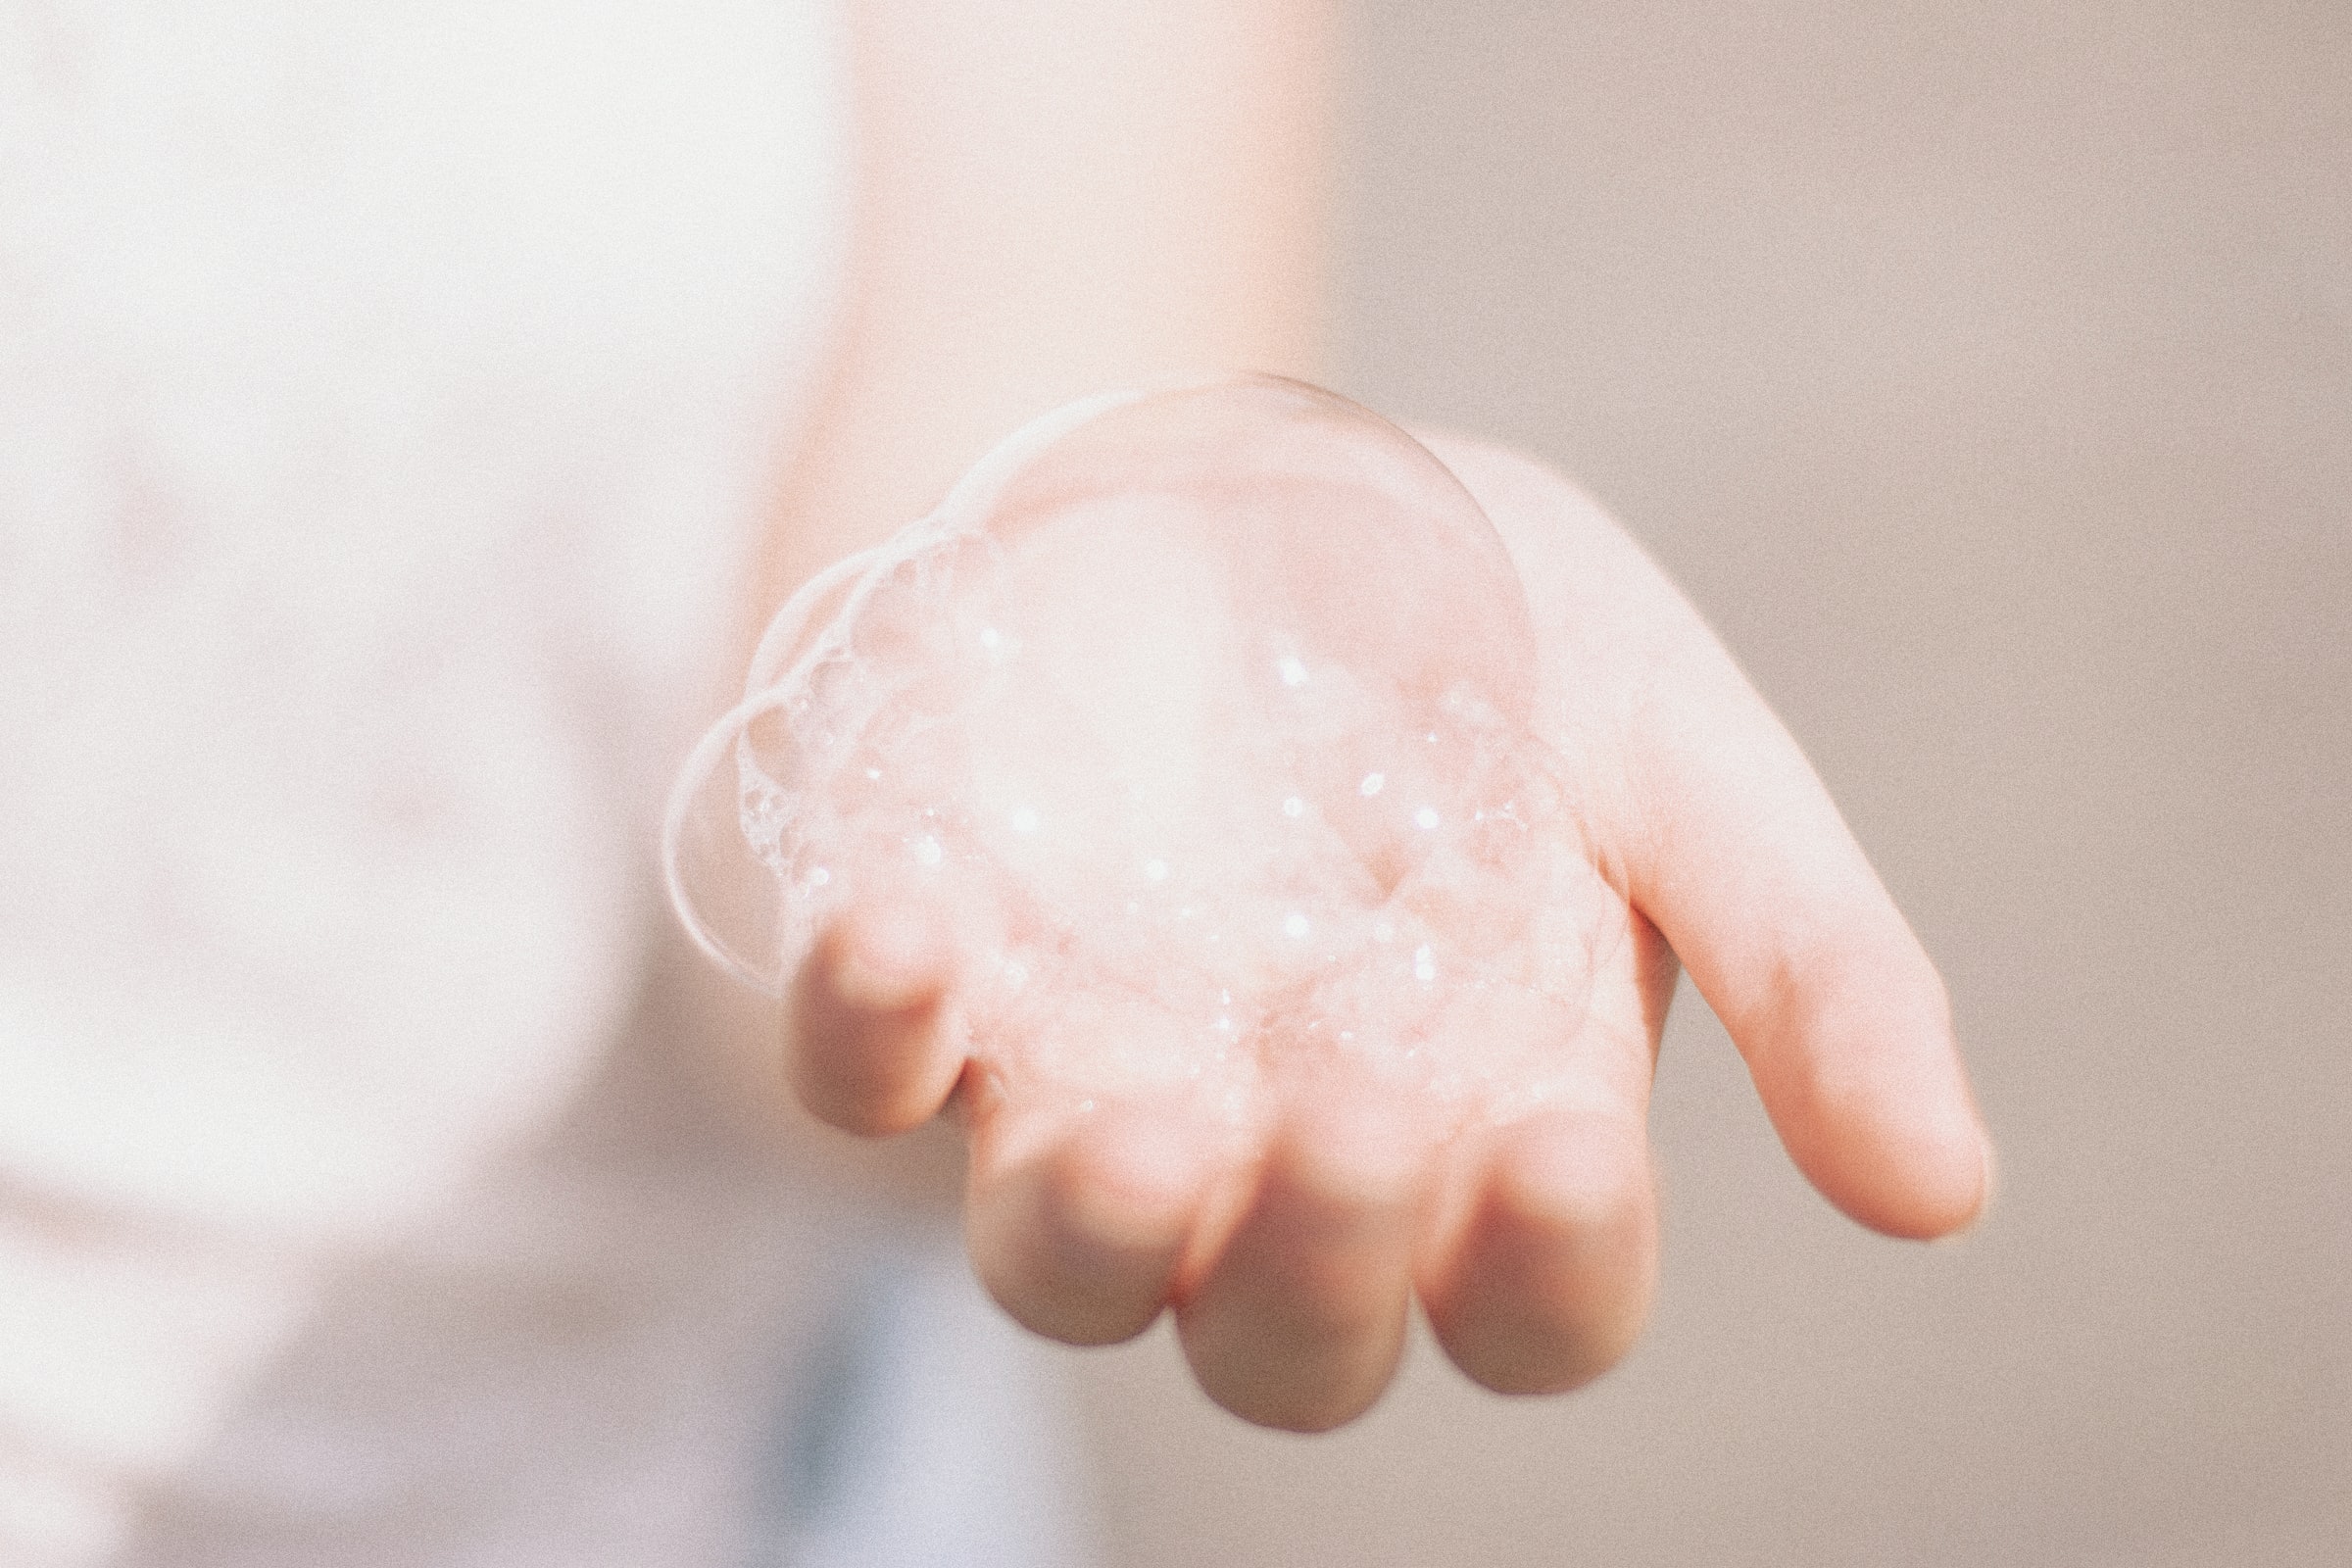 A bubble in someone's outstretched hand